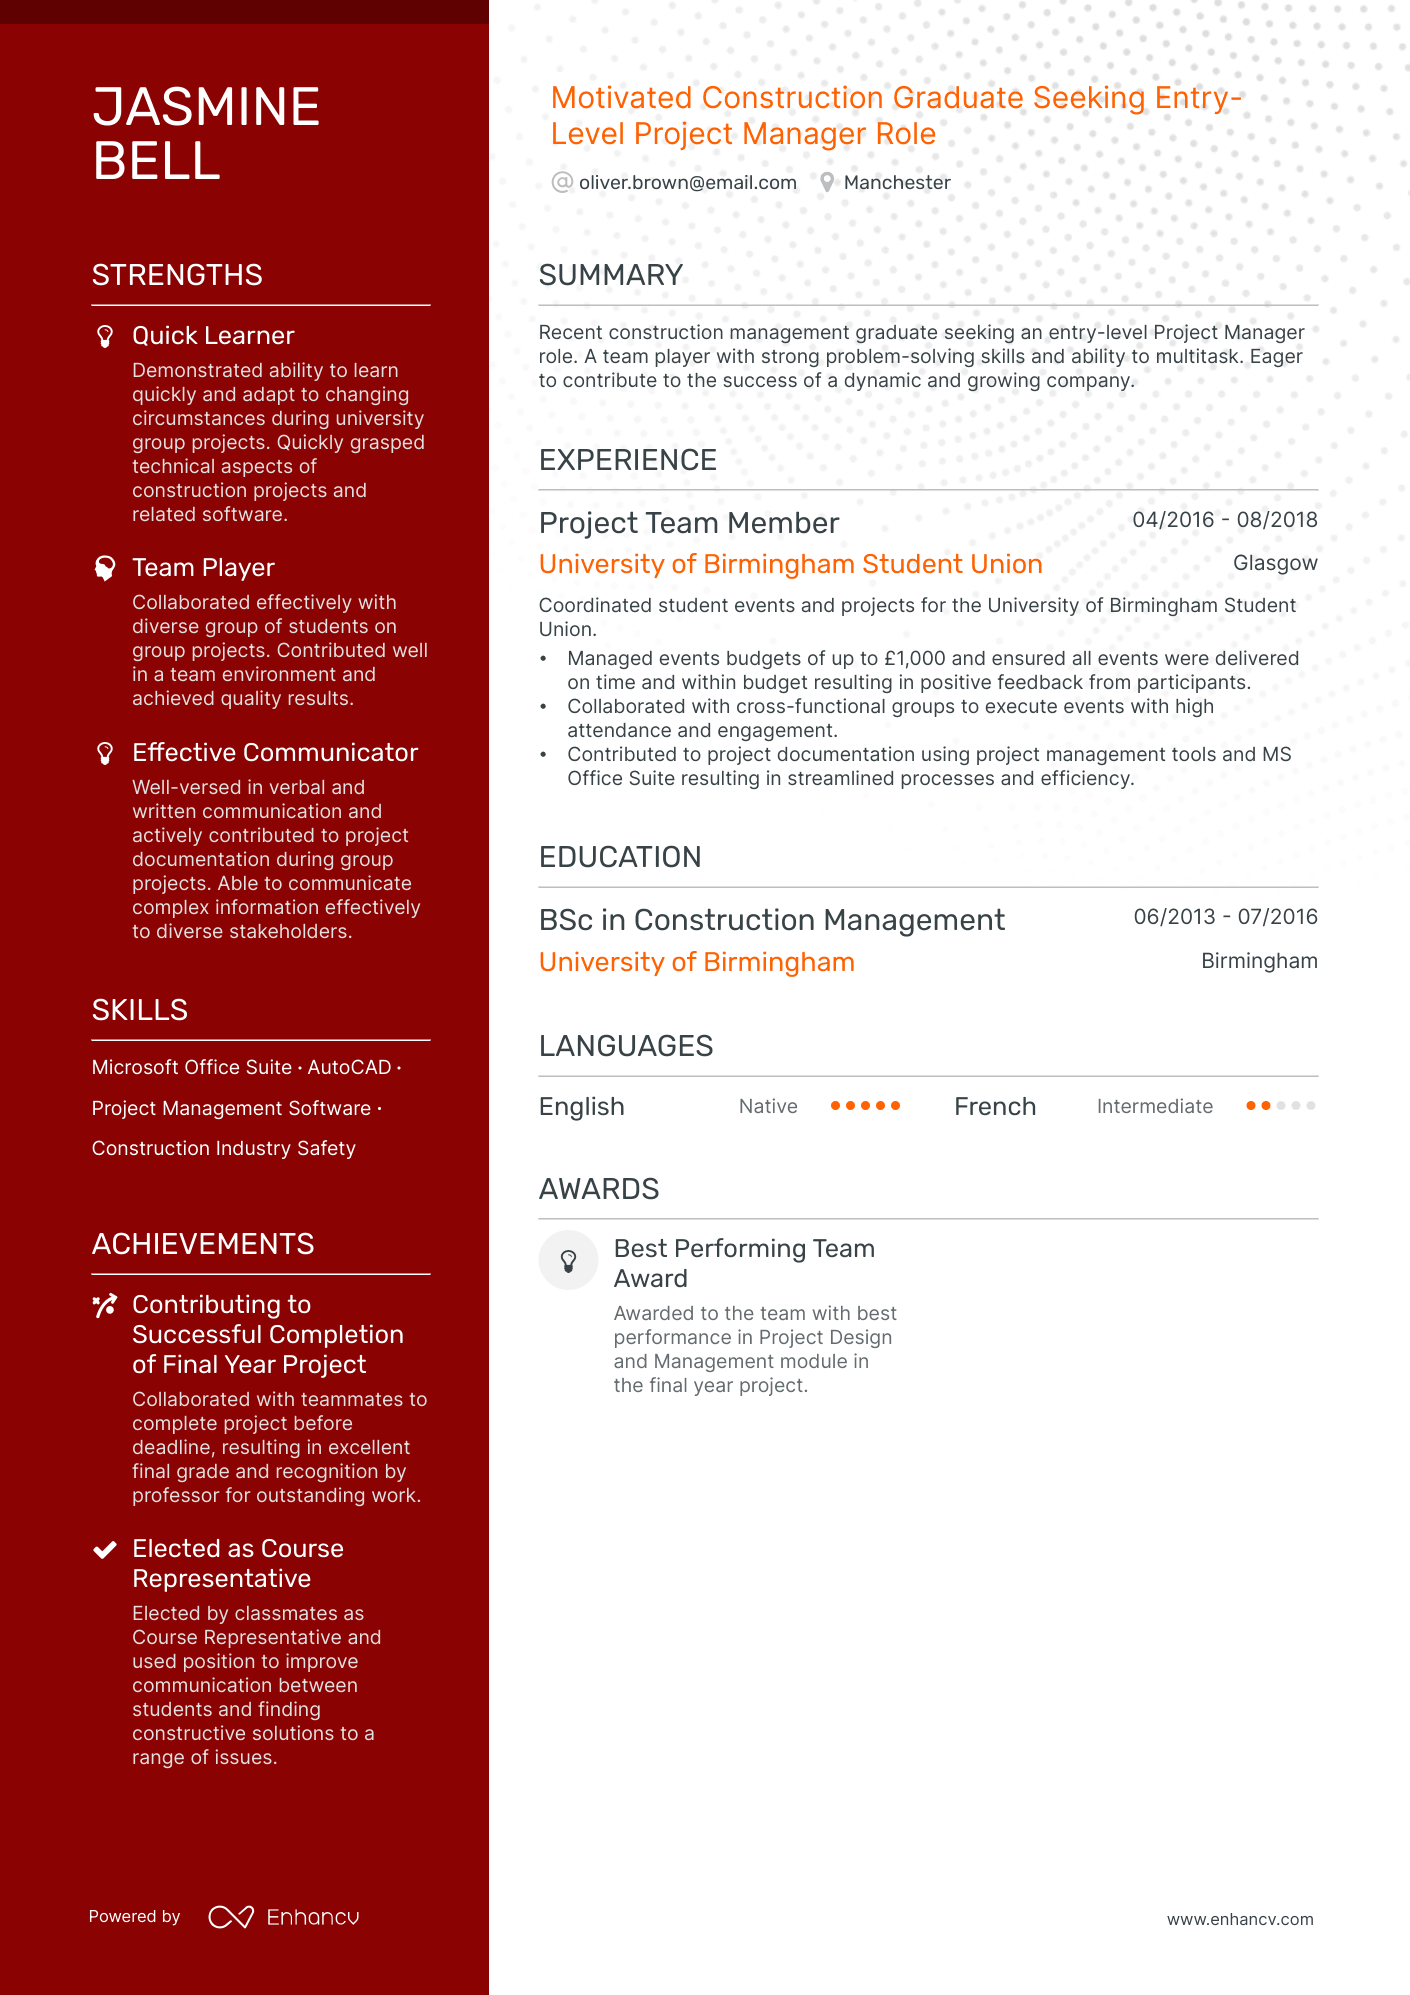 Motivated Construction Graduate Seeking Entry Level Project Manager Role CV example